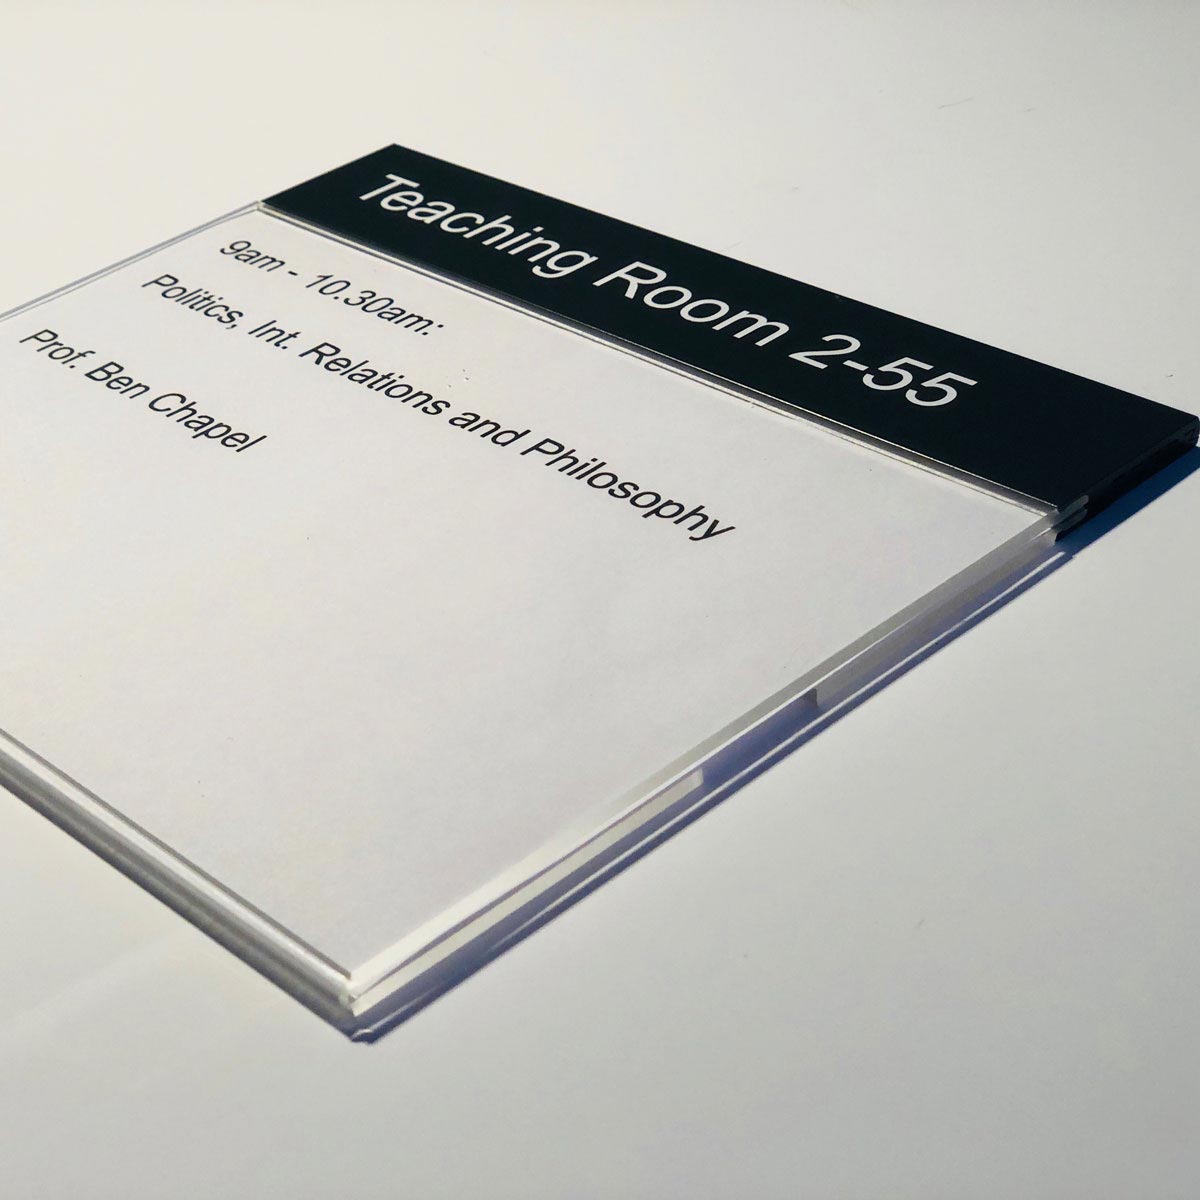 MSS A5 Wallet Sign for graphic paper insert - Static header information for room details